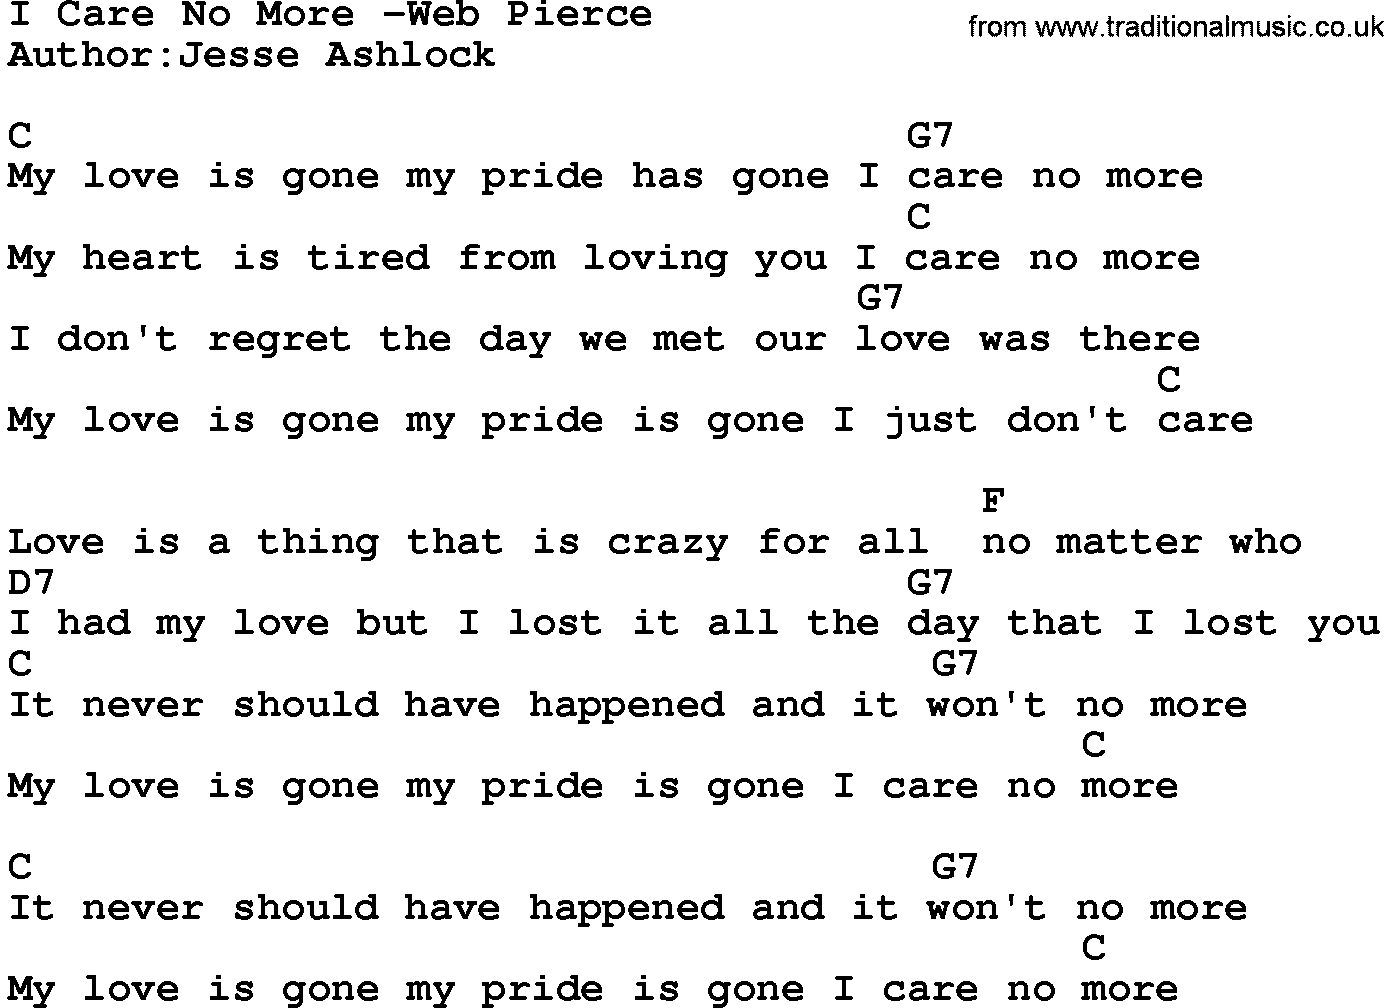 Country music song: I Care No More -Web Pierce lyrics and chords